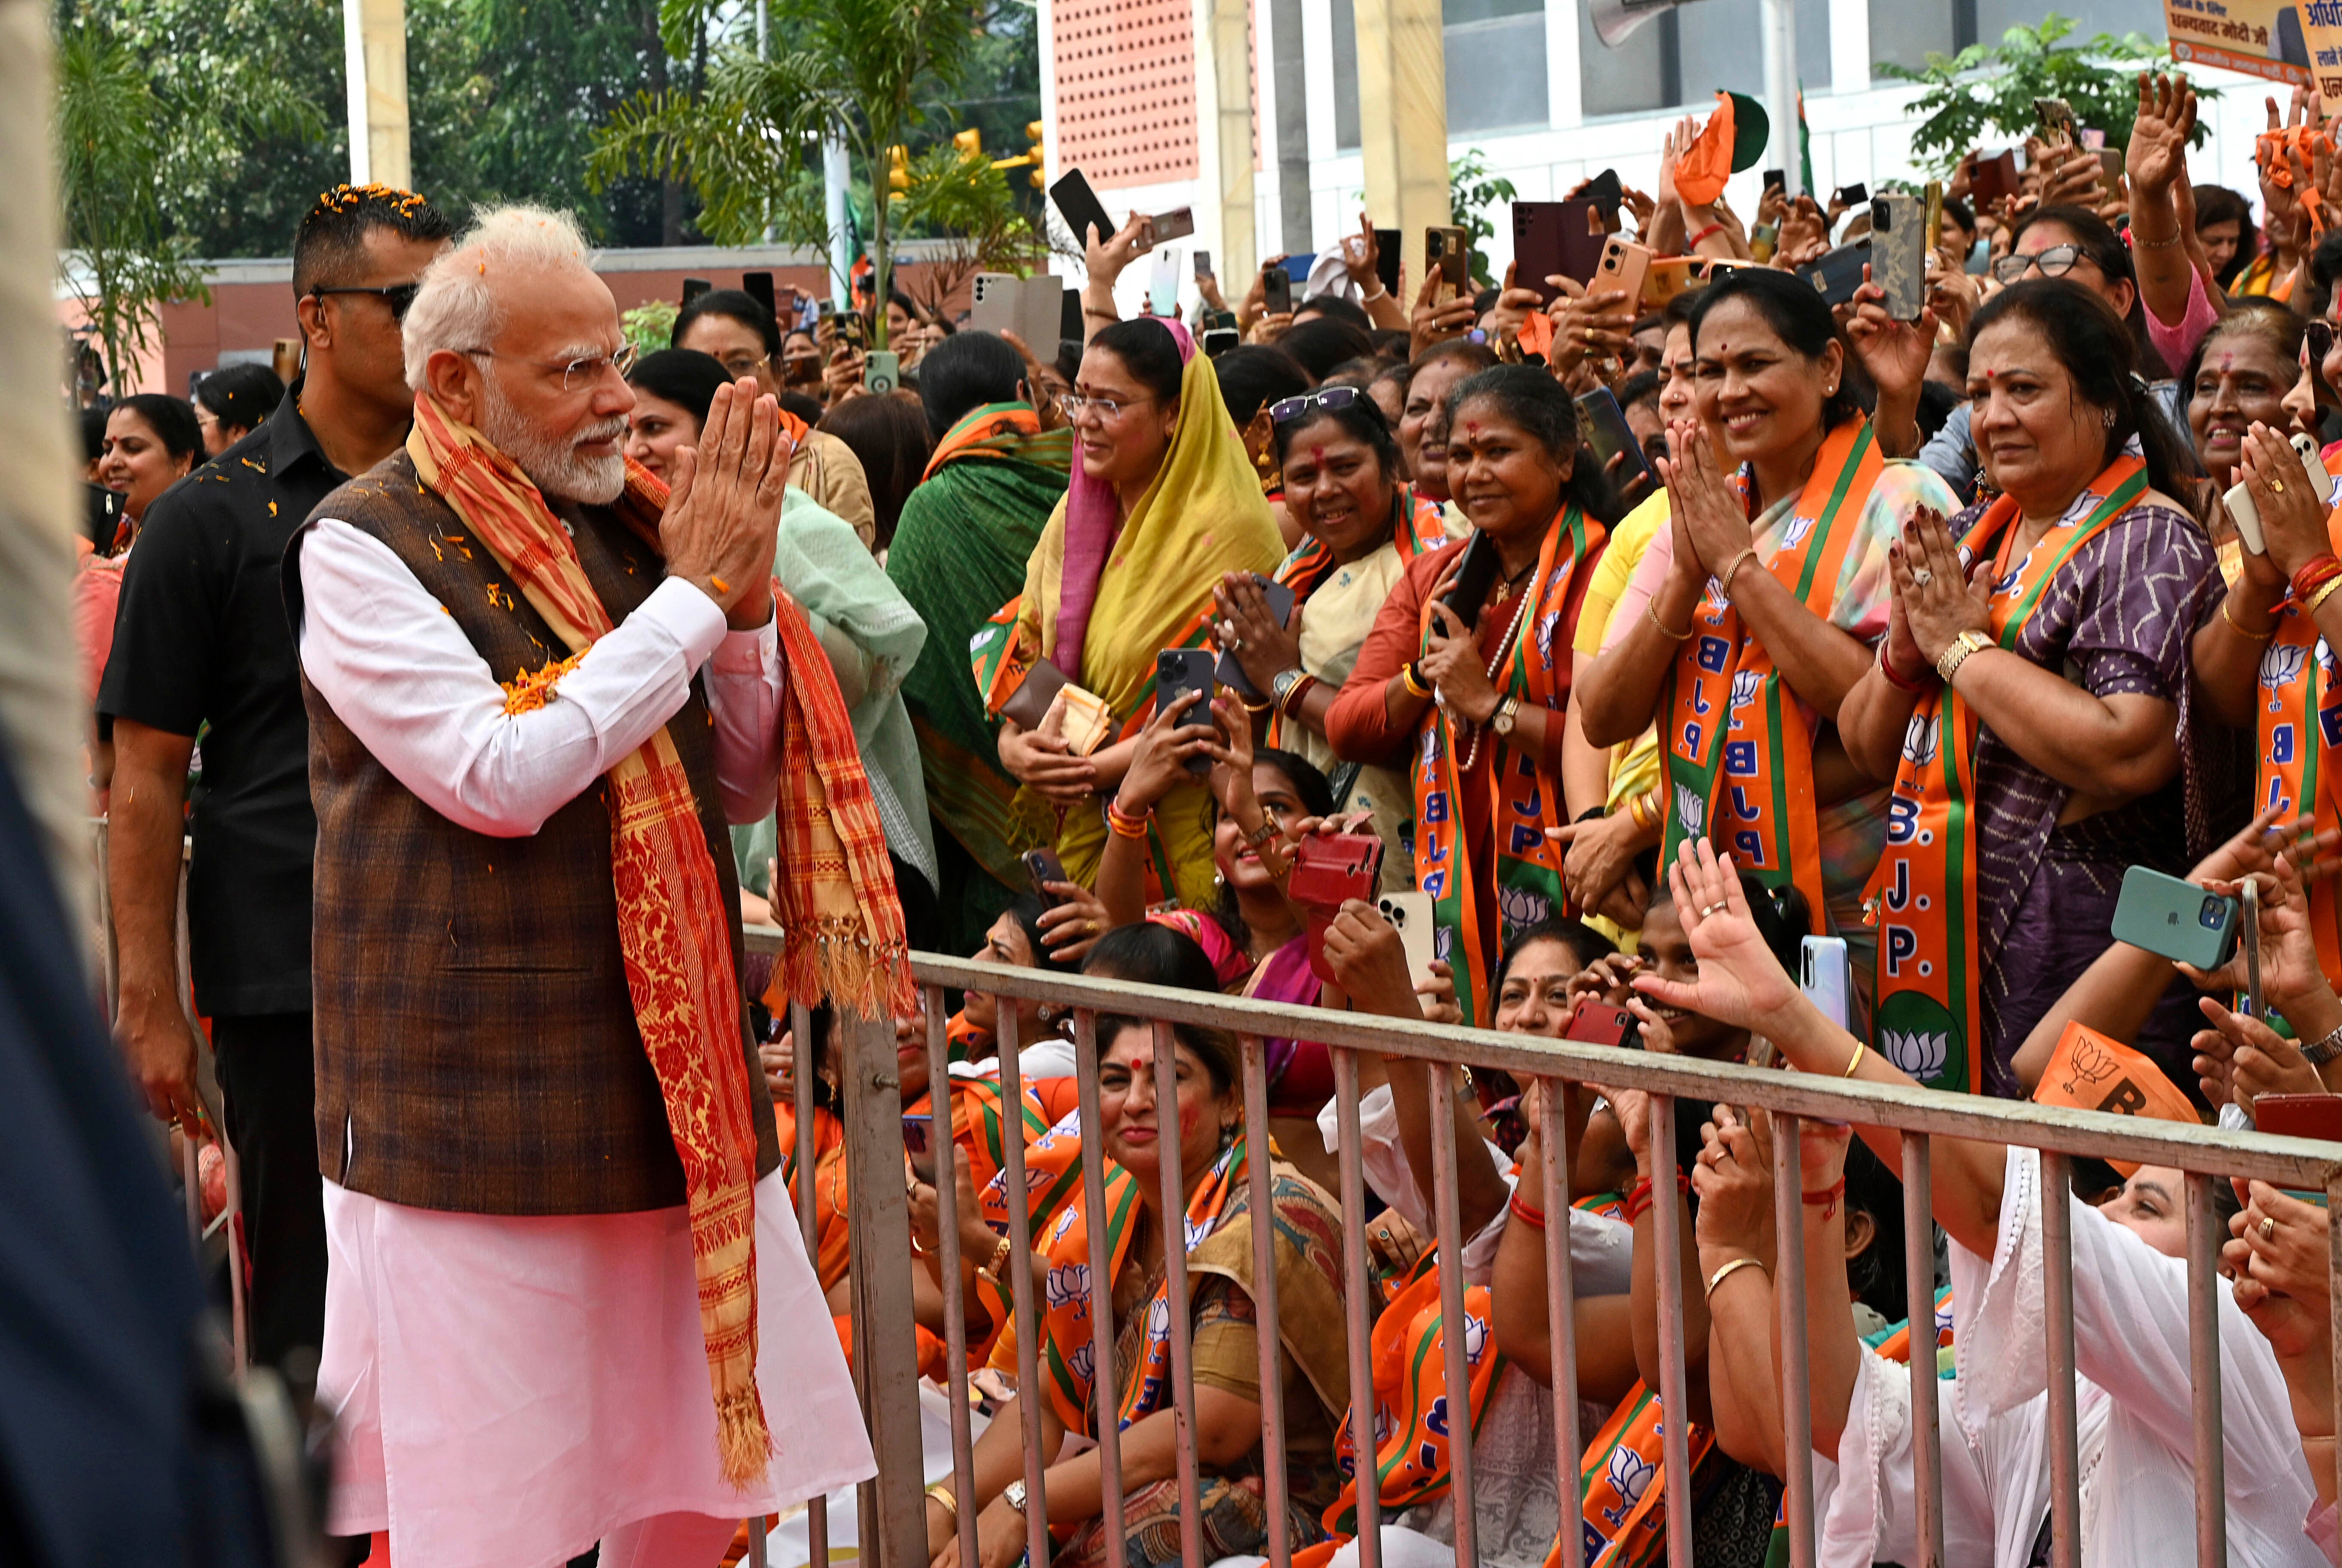 Prime minister Narendra Modi being felicitated by women at the Bharatiya Janata Party (BJP) headquarters in New Delhi, India